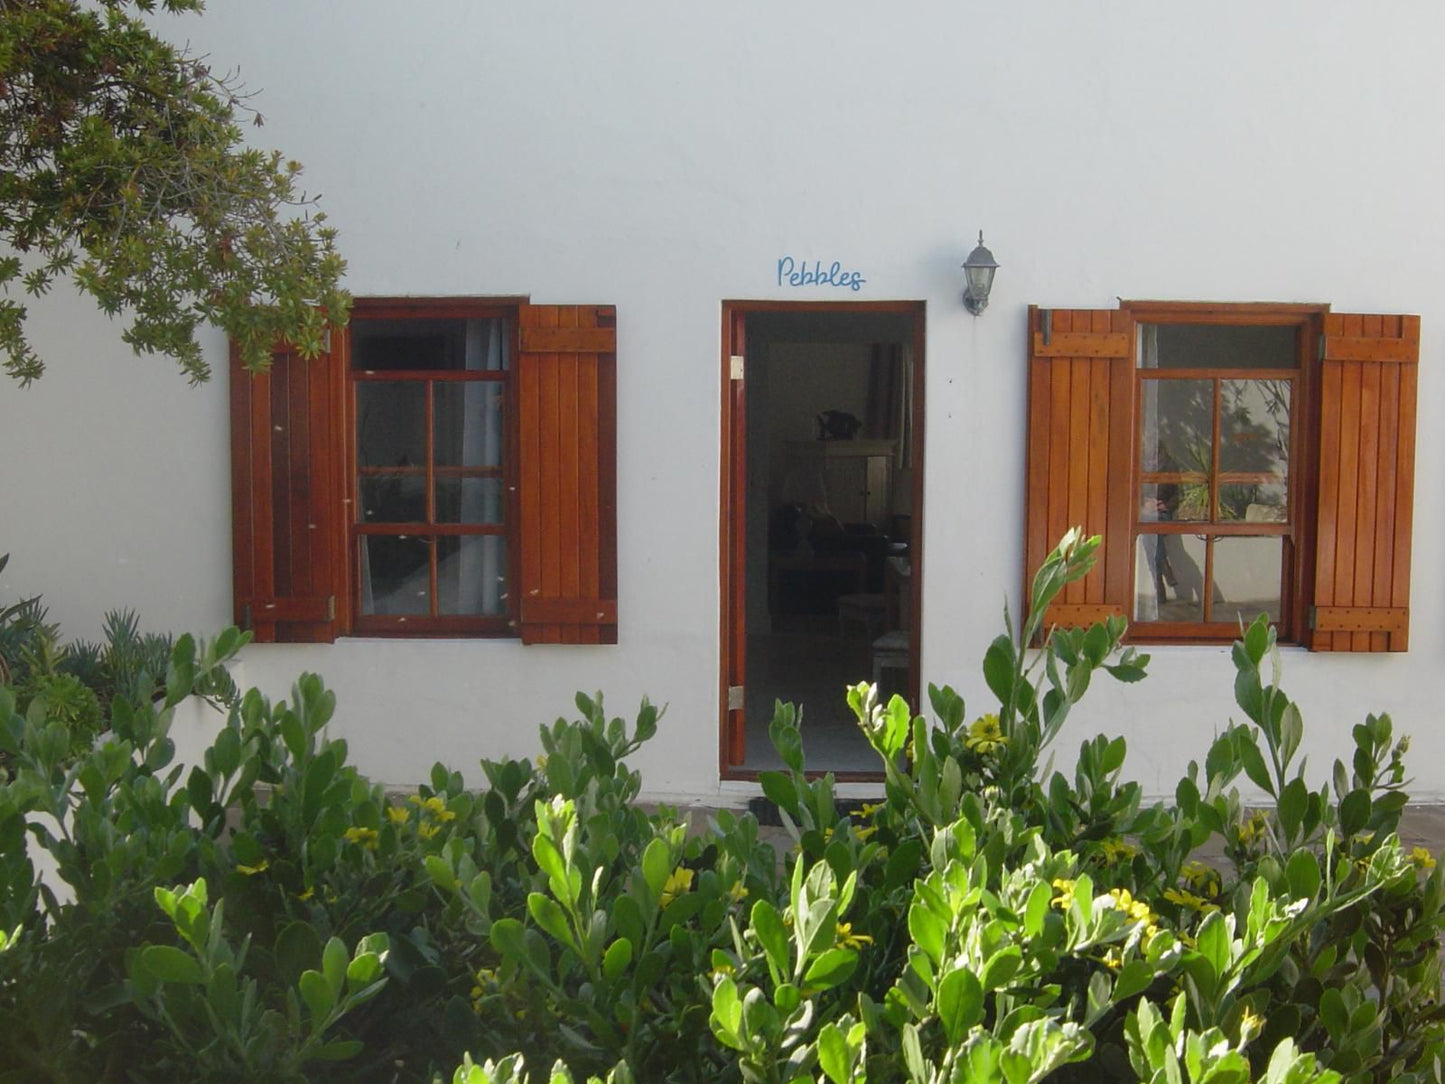 Palm And Pebbles Voorstrand Paternoster Western Cape South Africa Building, Architecture, Door